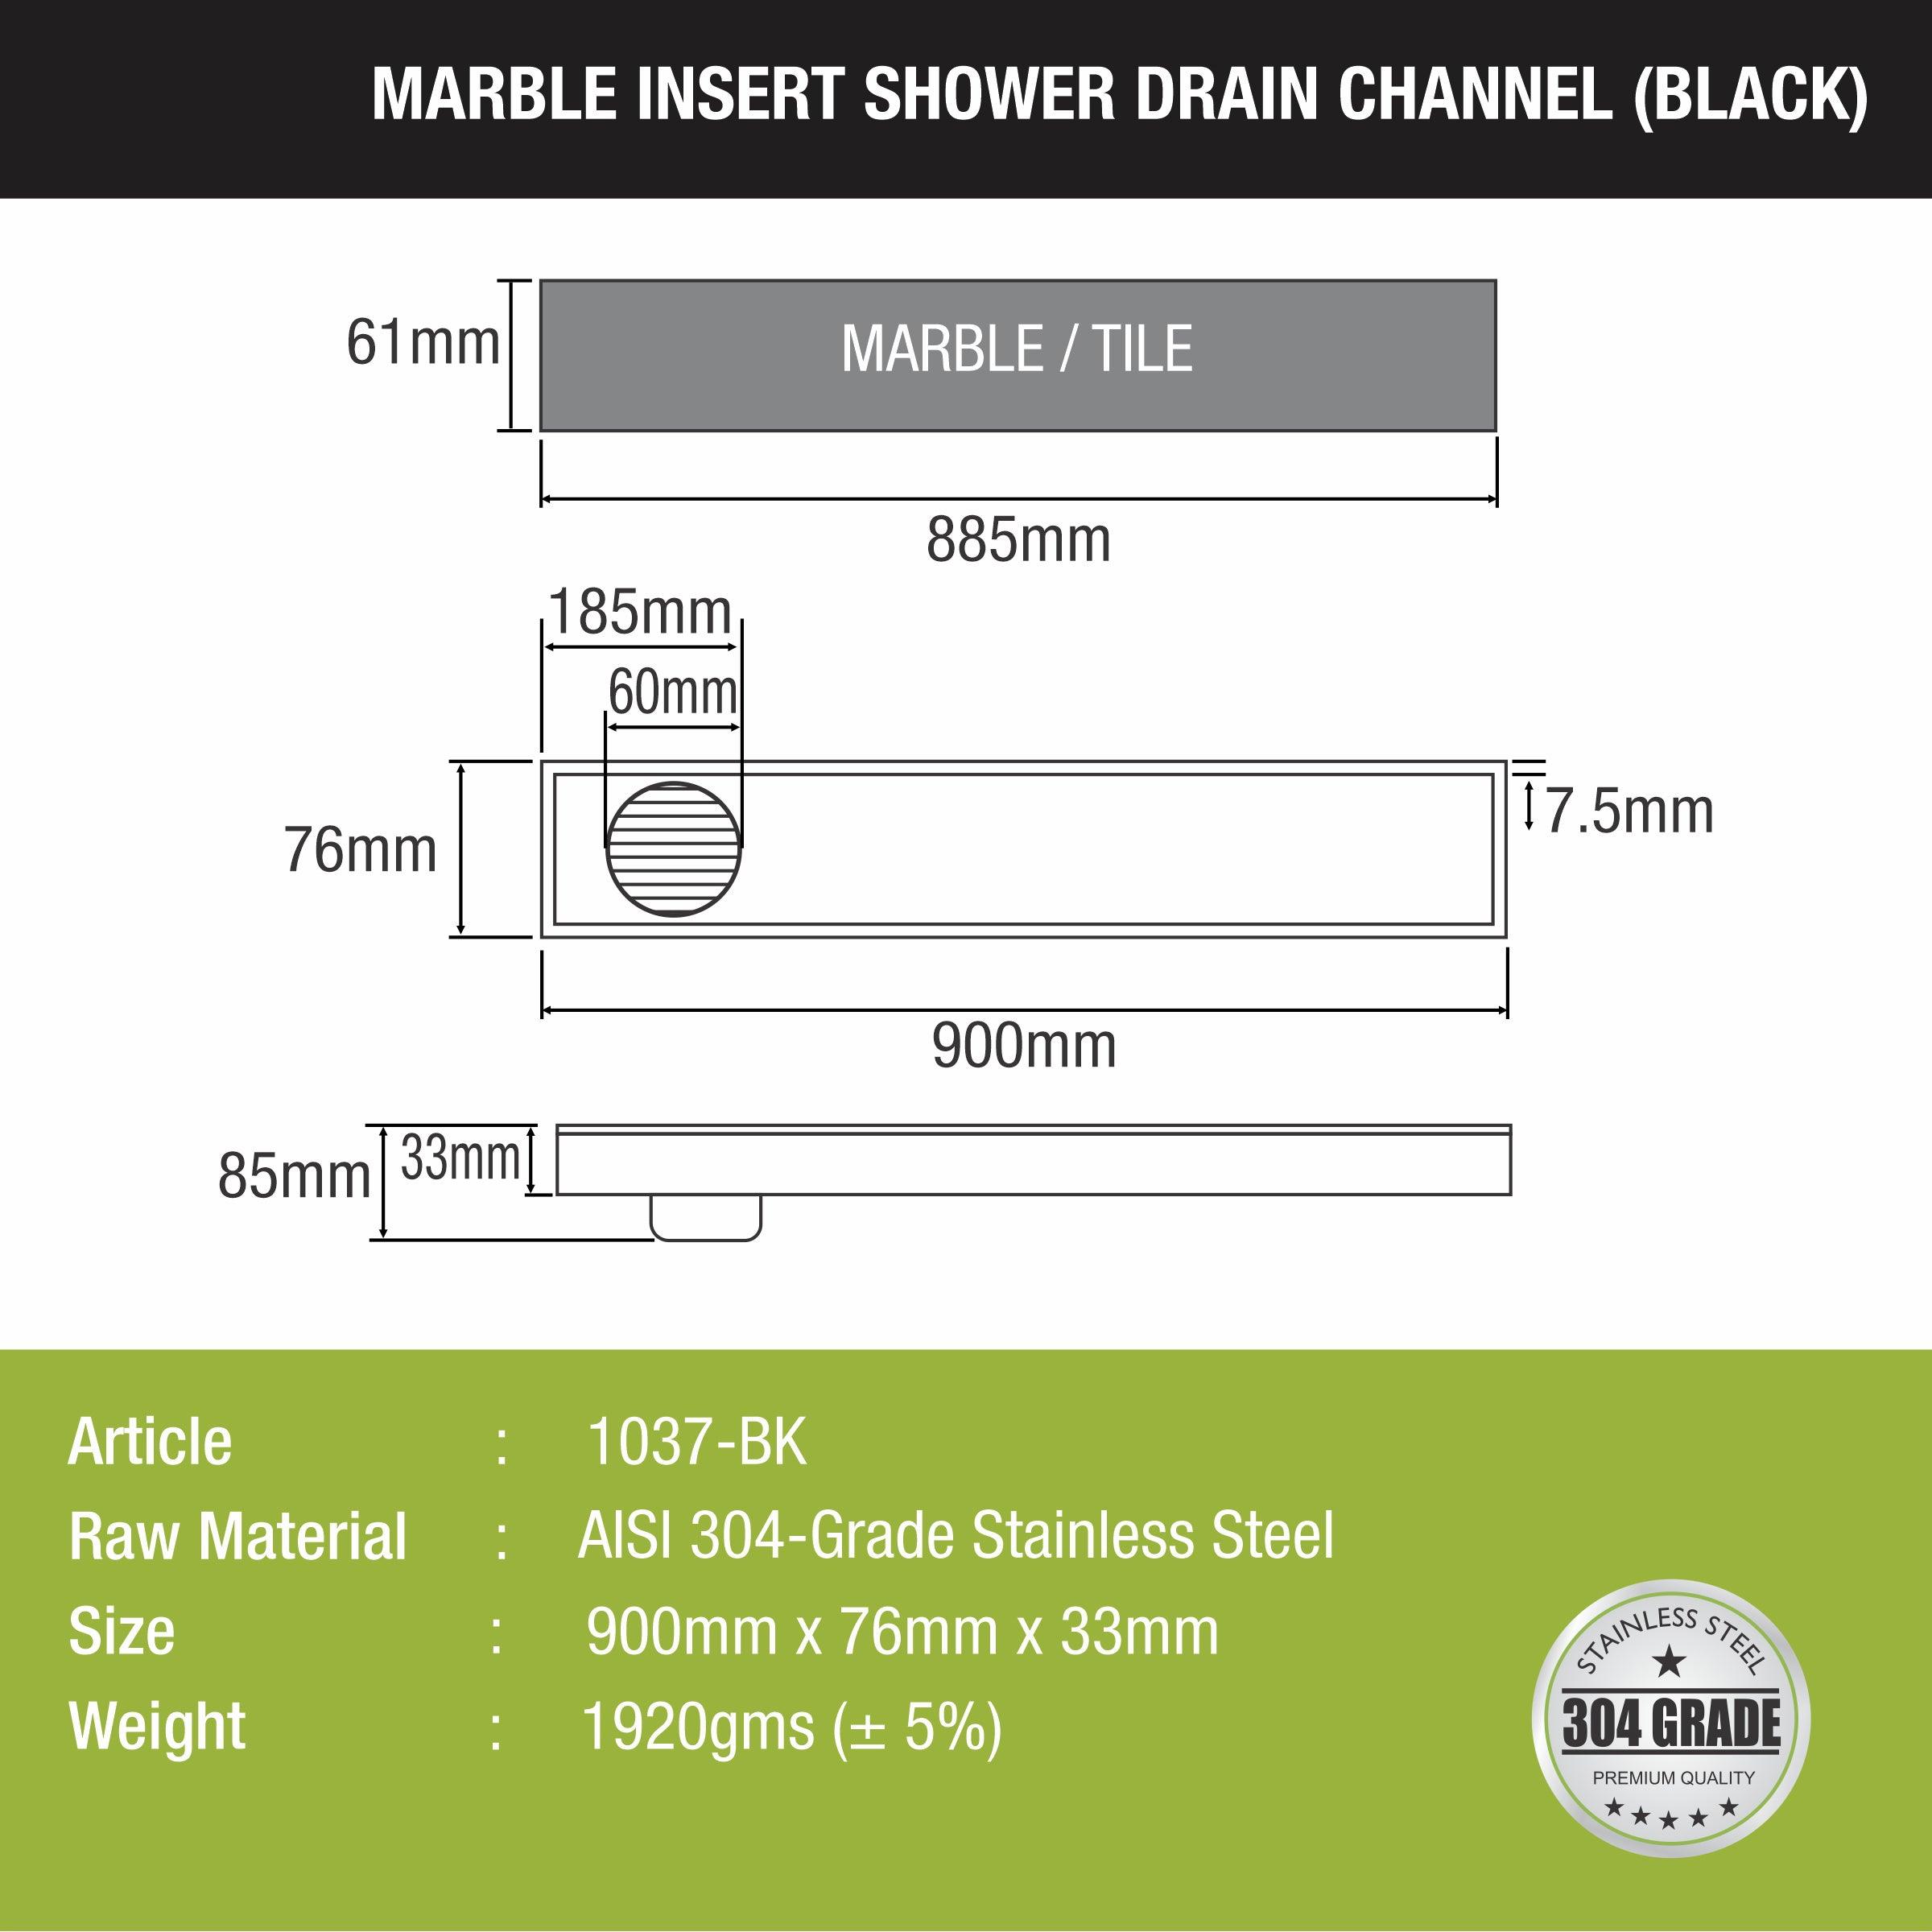 Marble Insert Shower Drain Channel - Black (36 x 3 Inches) size and measurement